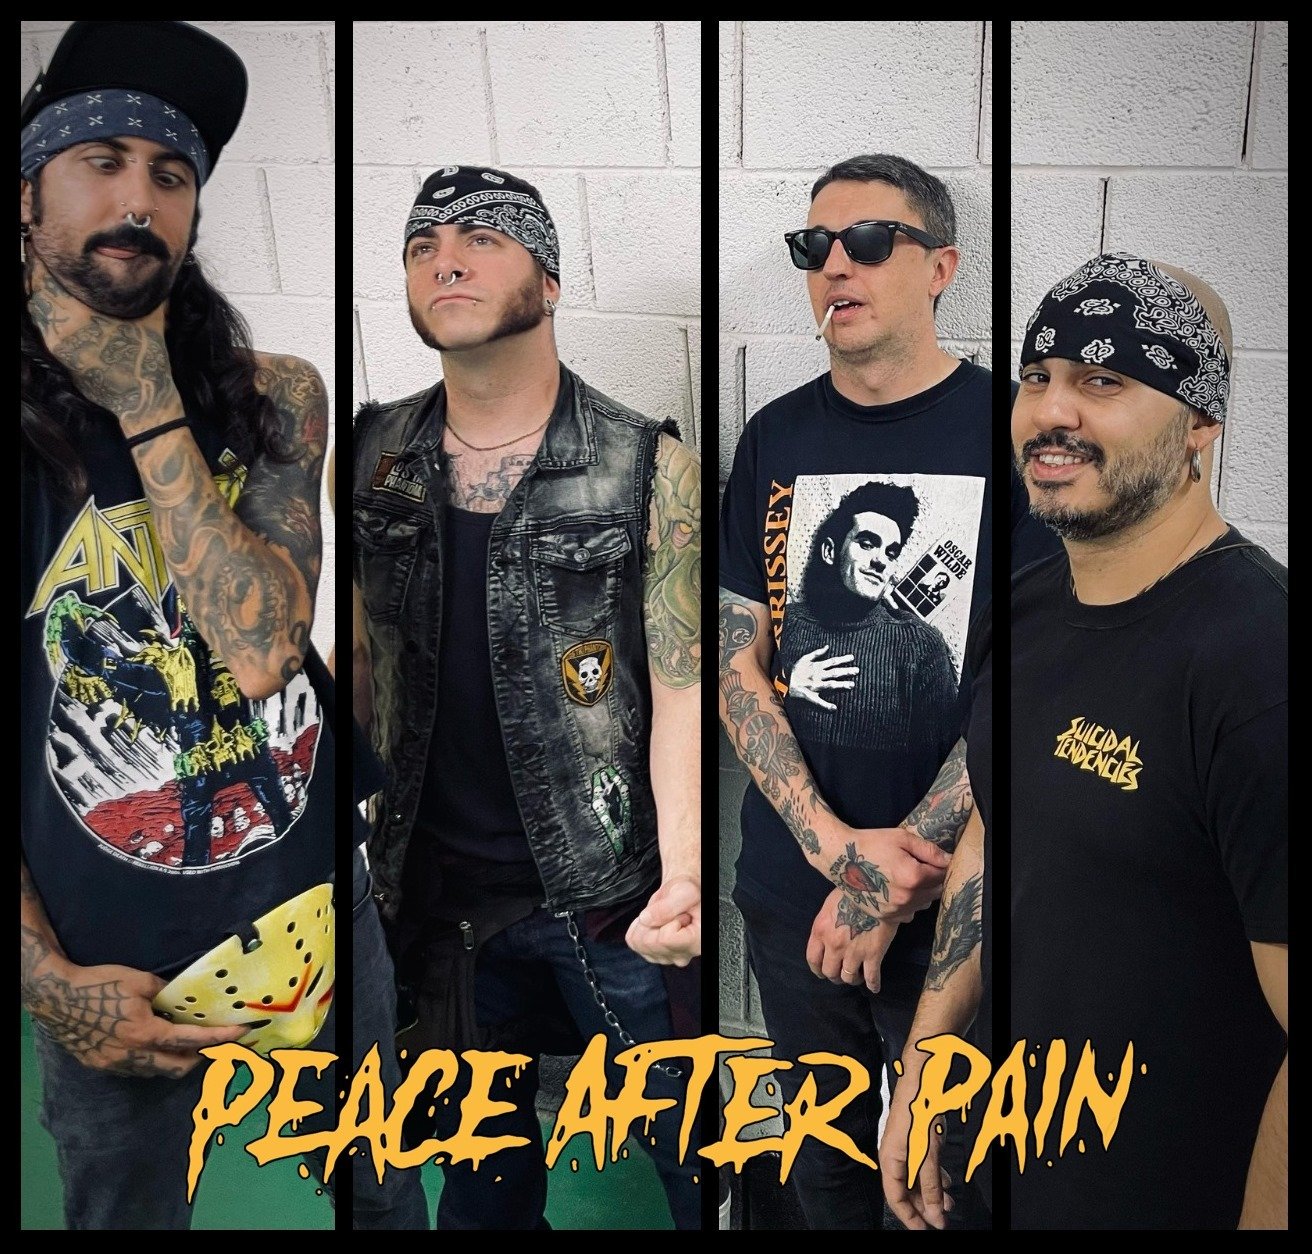 Interview with PEACE AFTER PAIN